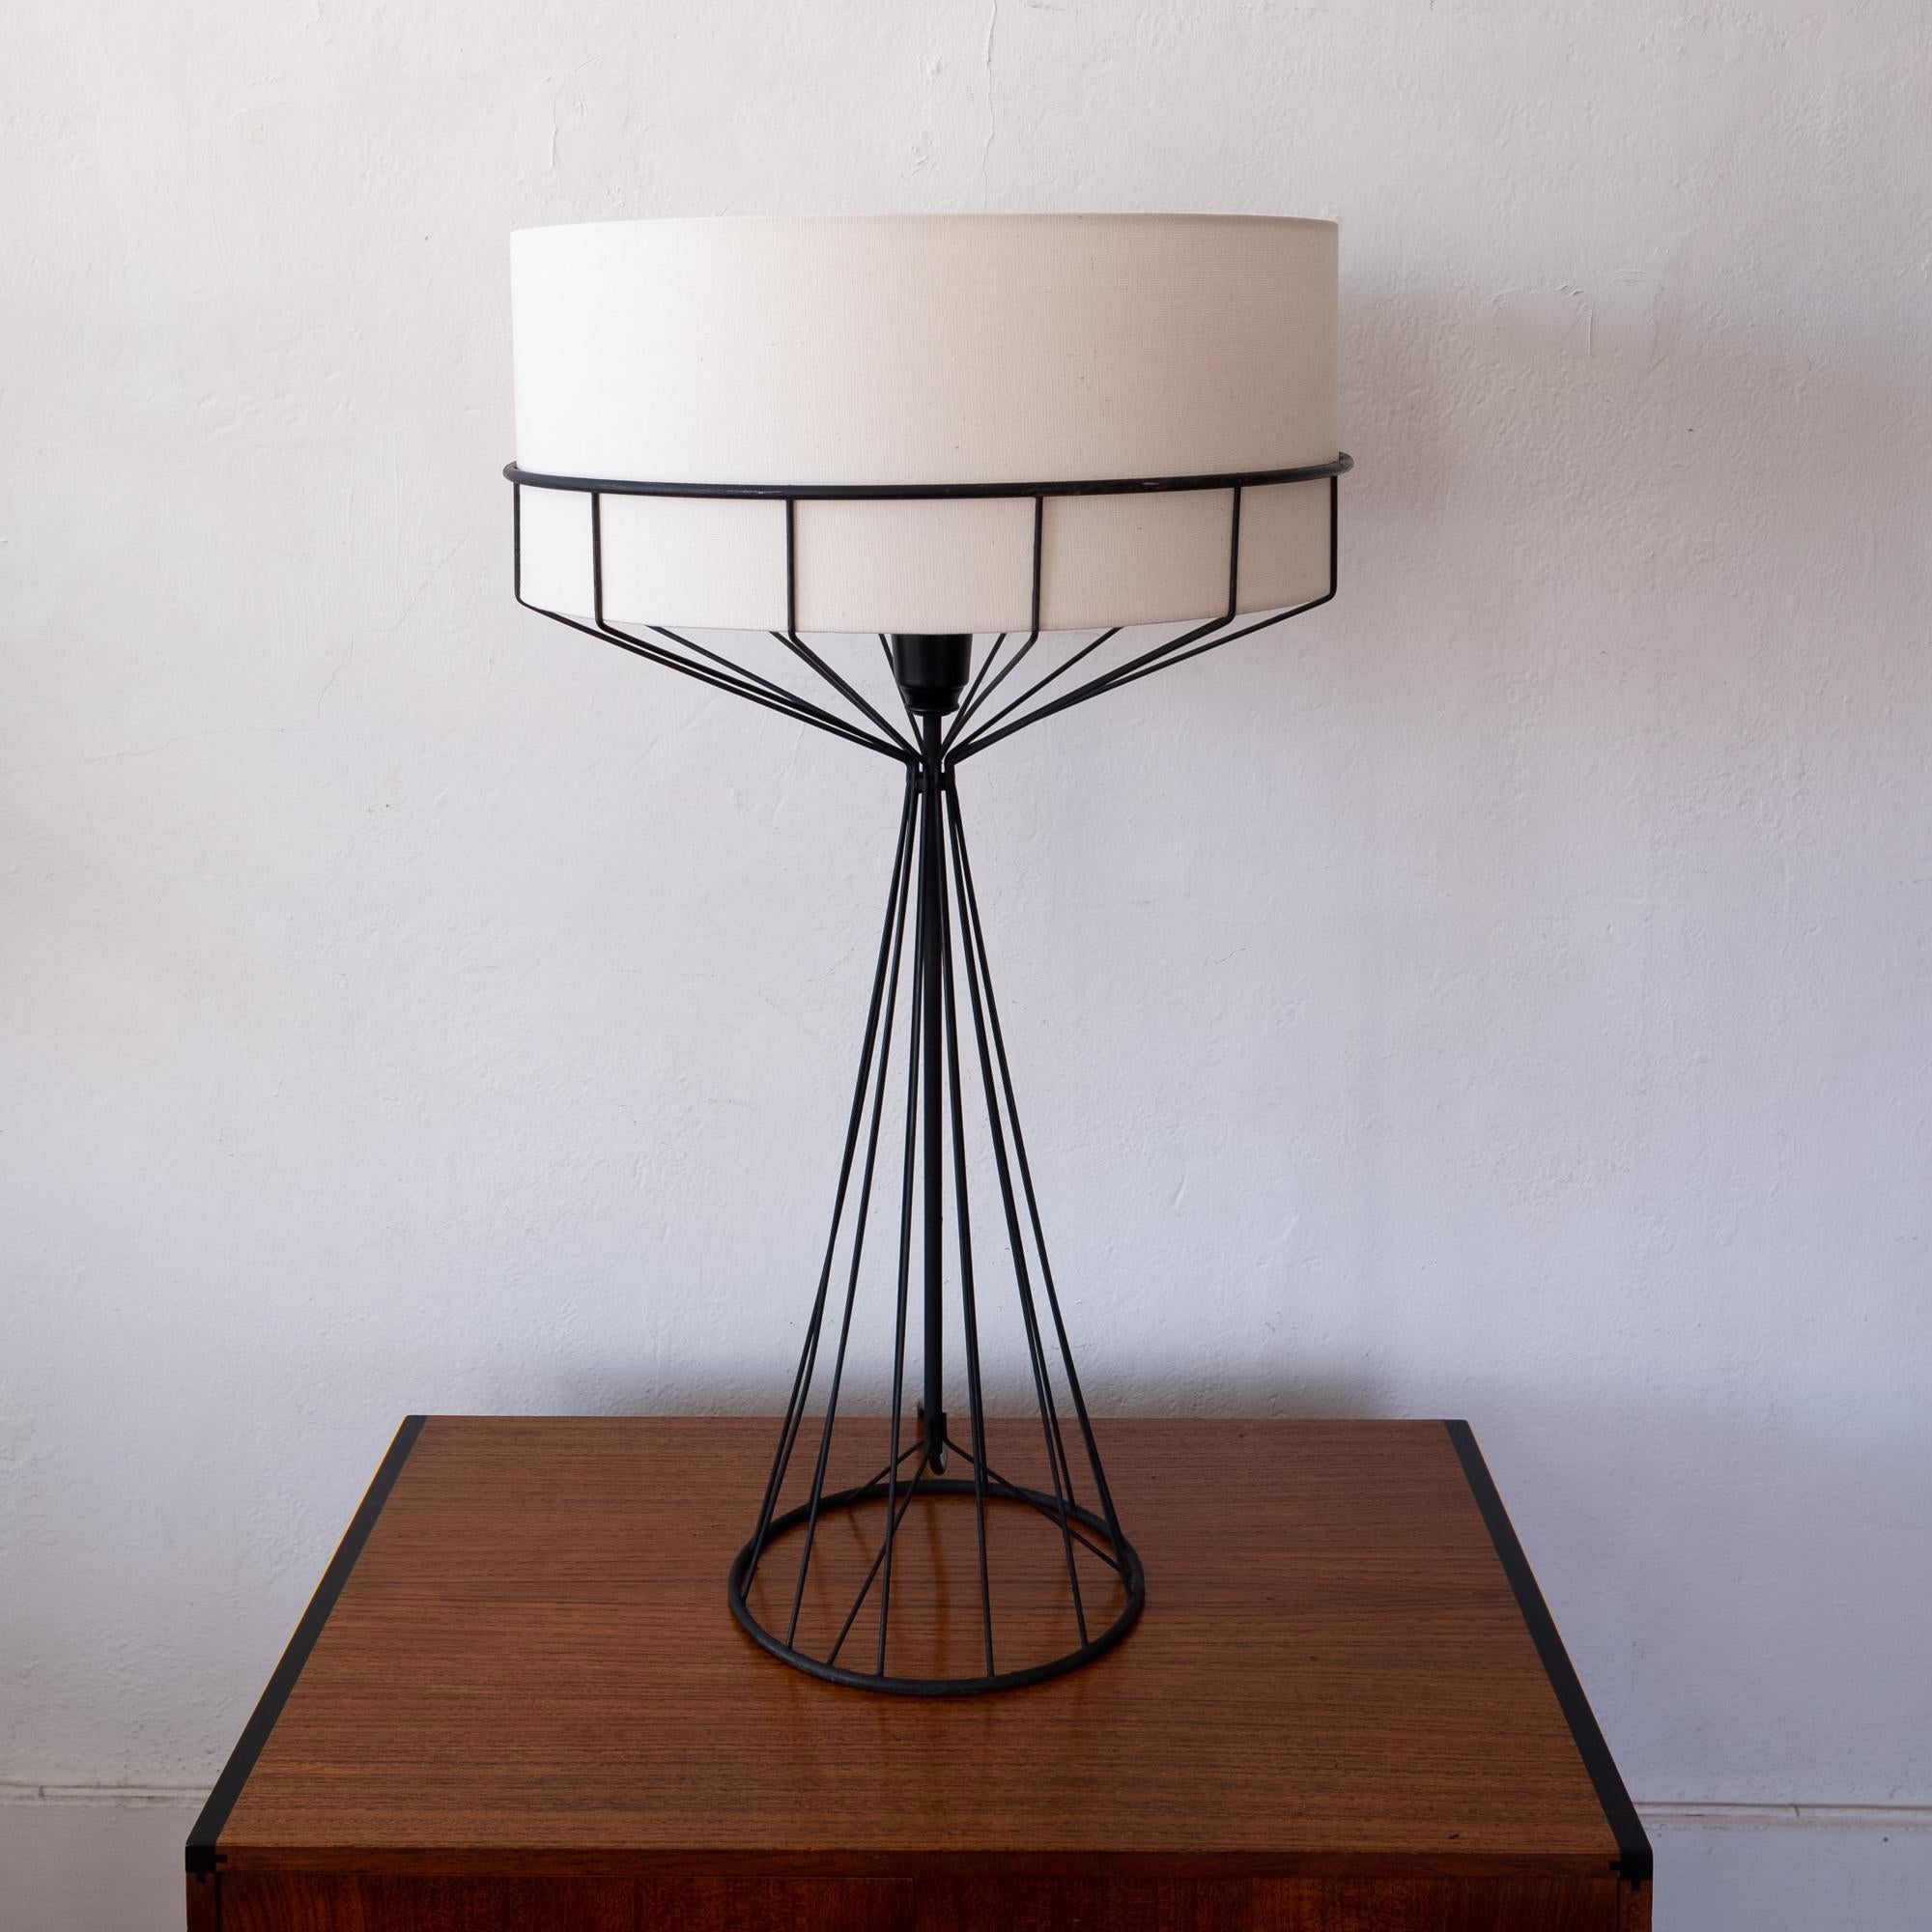 American Midcentury Table Lamp by Tony Paul, 1950s